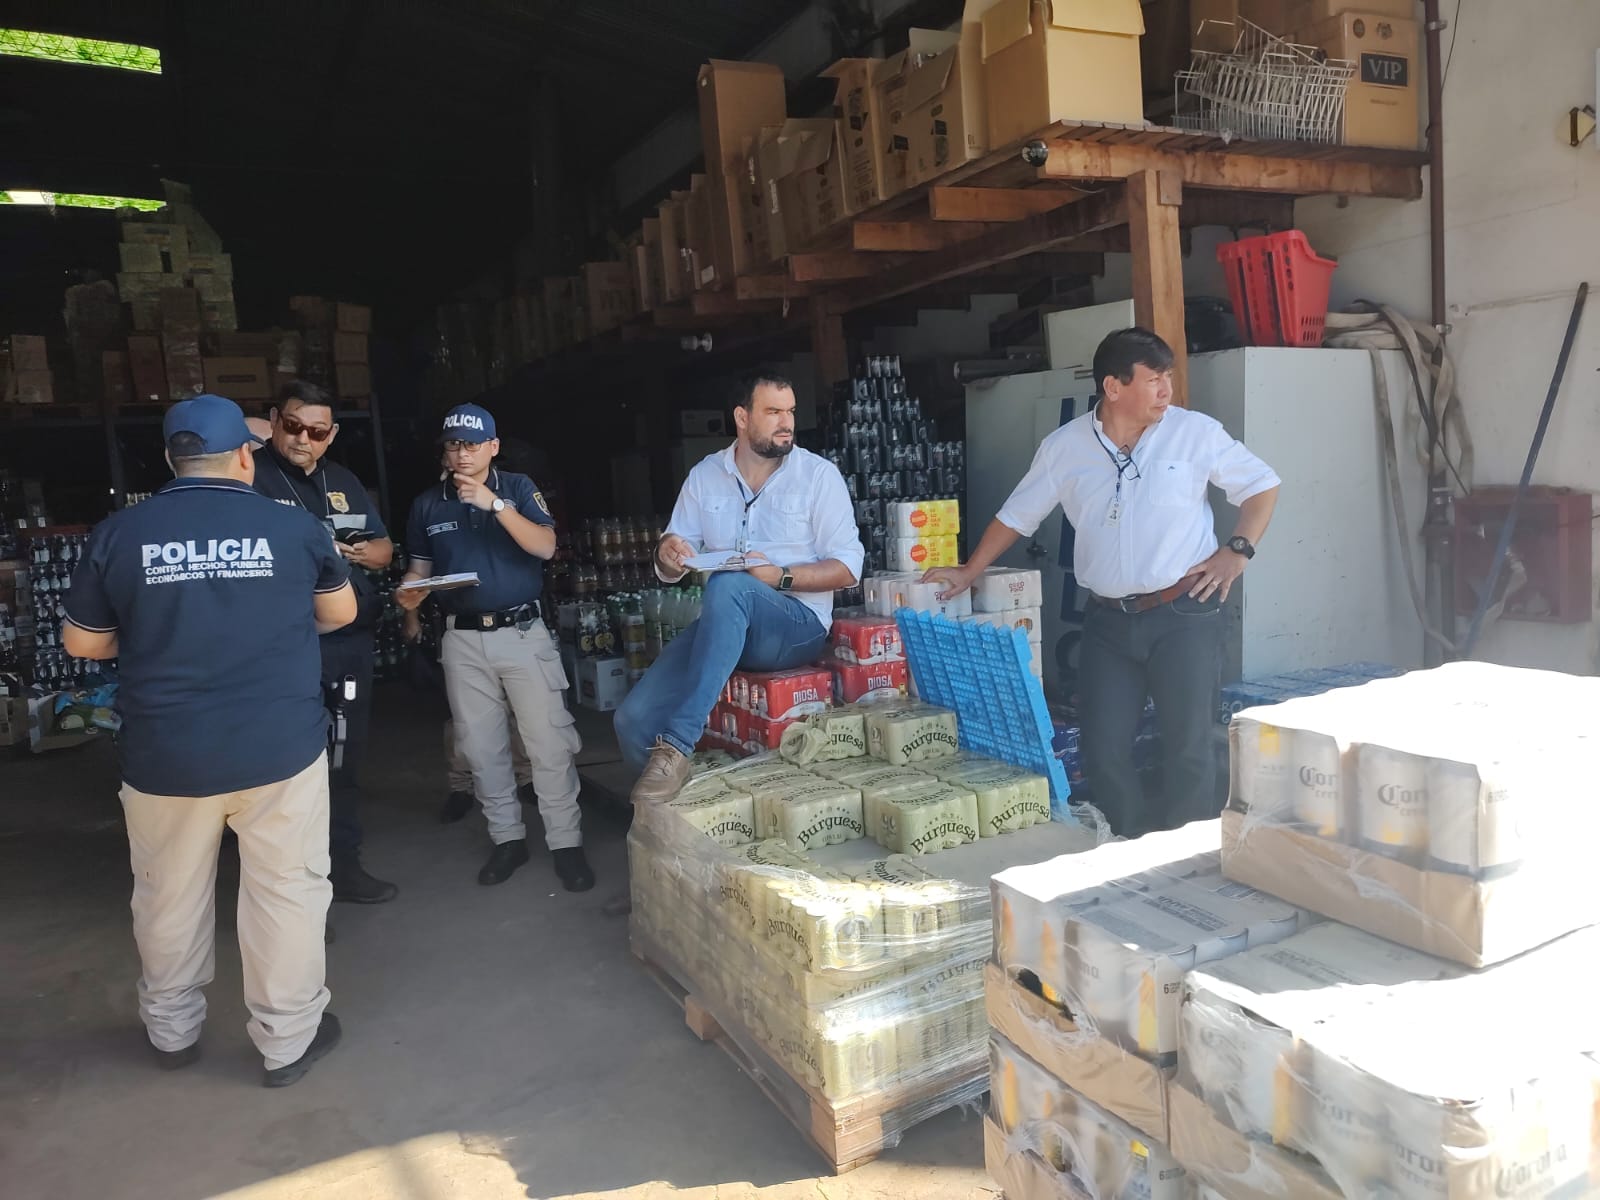 They seize a large amount of contraband products in Coronel Oviedo